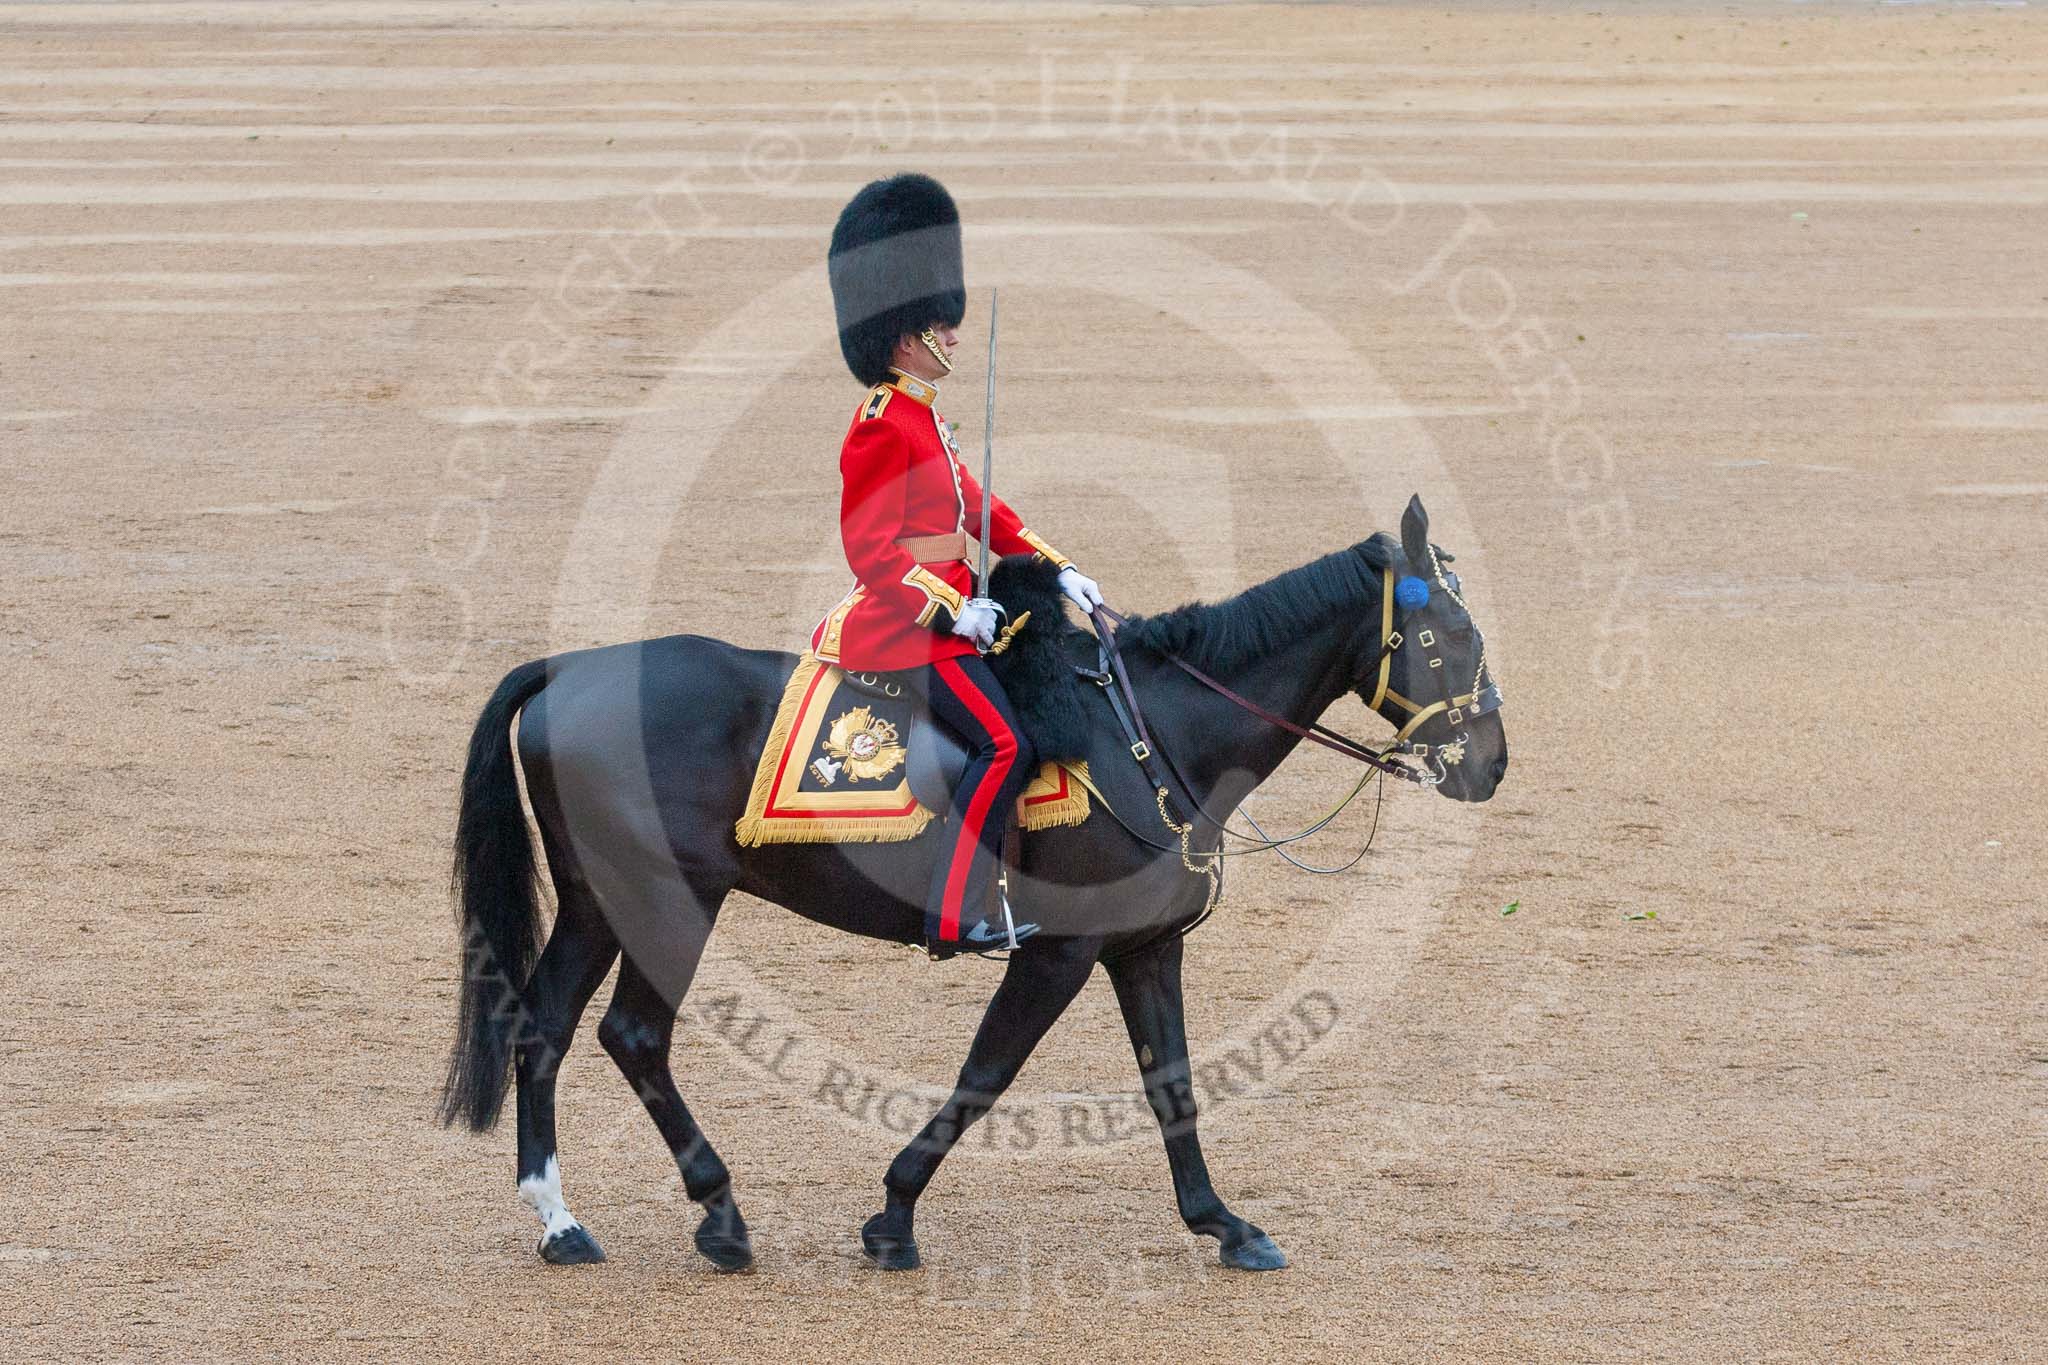 Trooping the Colour 2015. Image #504, 13 June 2015 11:44 Horse Guards Parade, London, UK